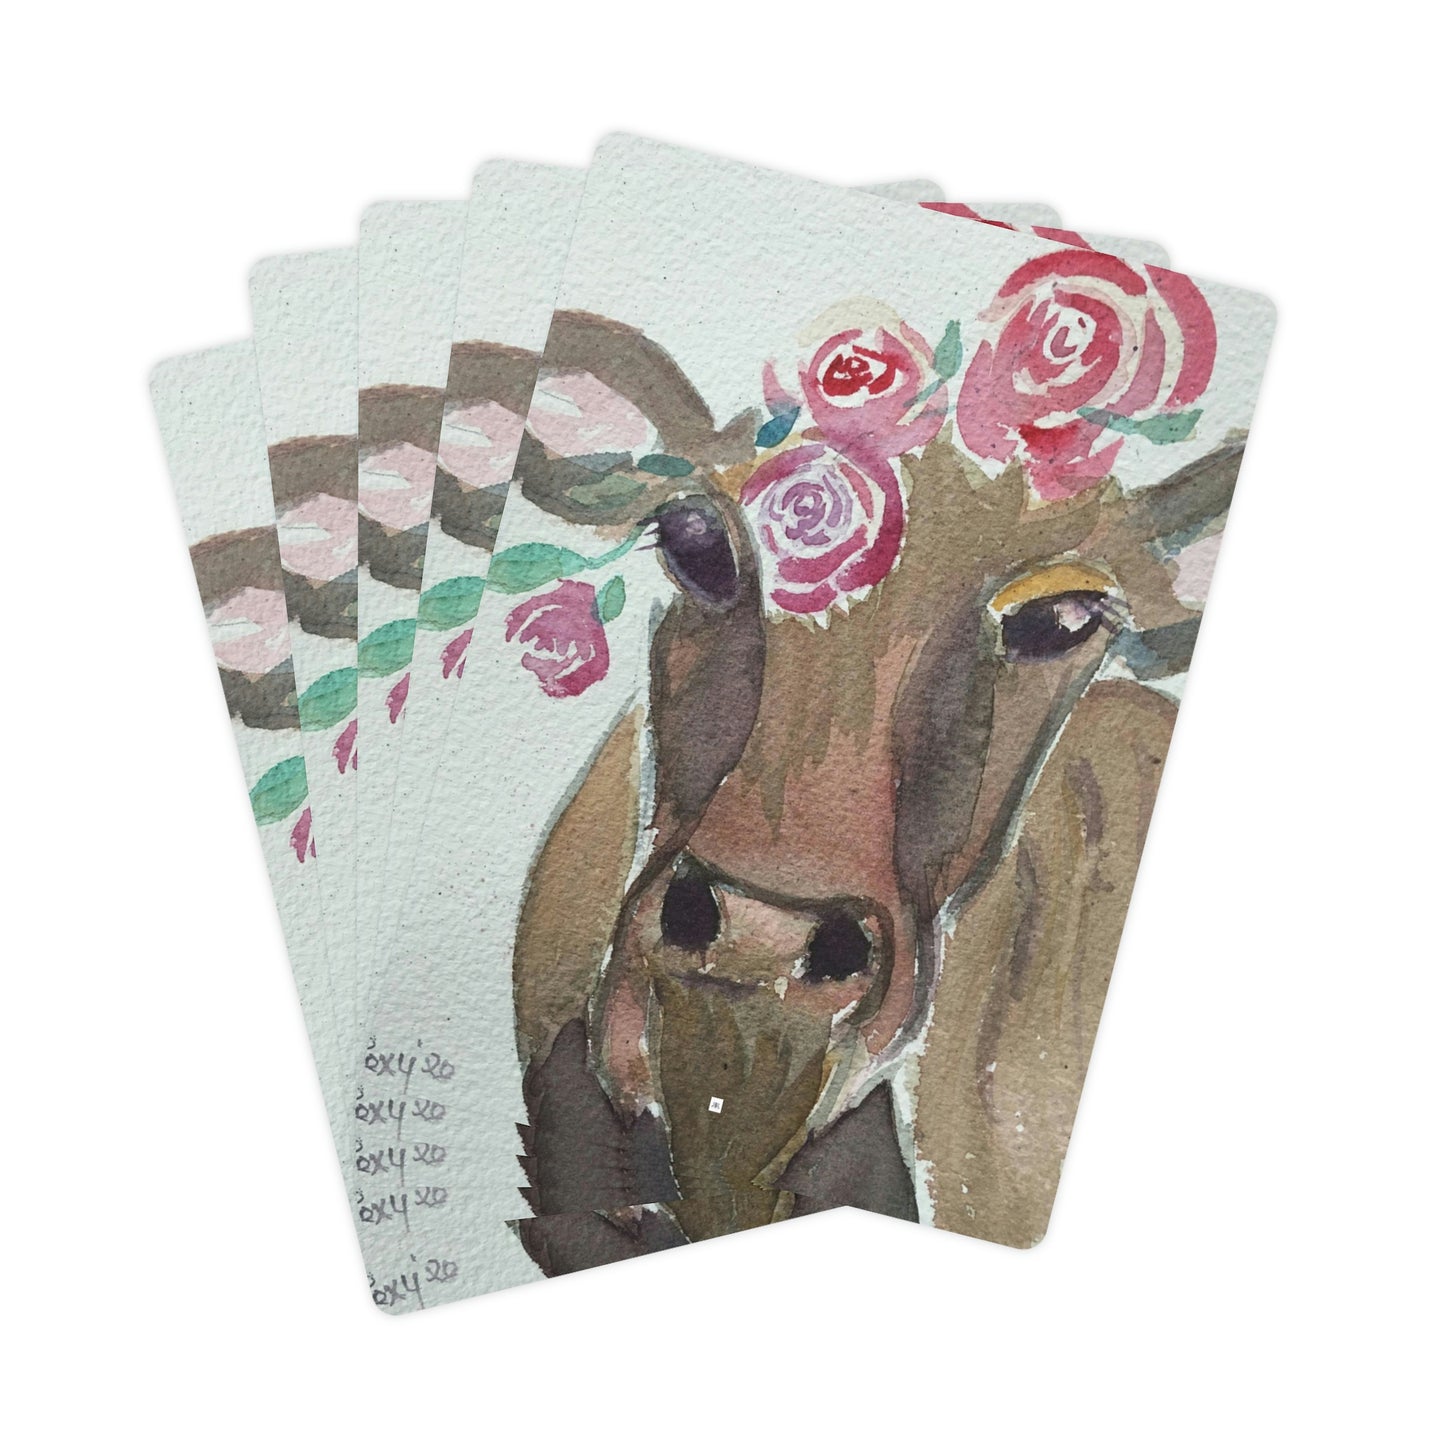 Gertie -Whimsical Cow- Poker Cards/Playing Cards